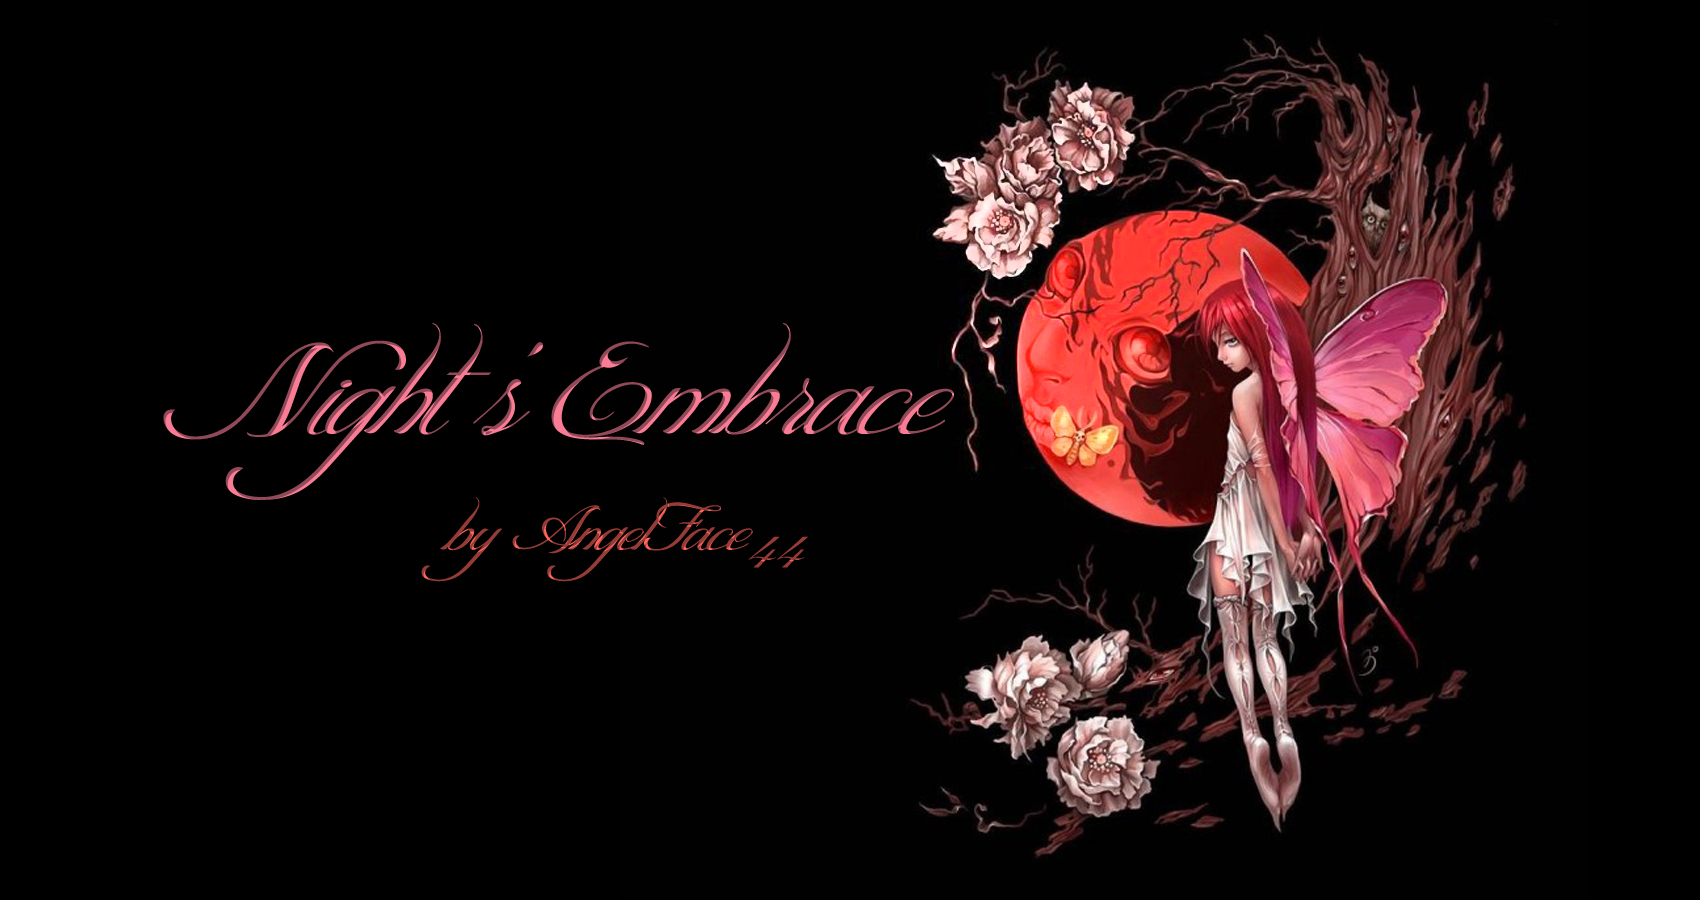 Night's Embrace written by AngelFace44 at Spillwords.com